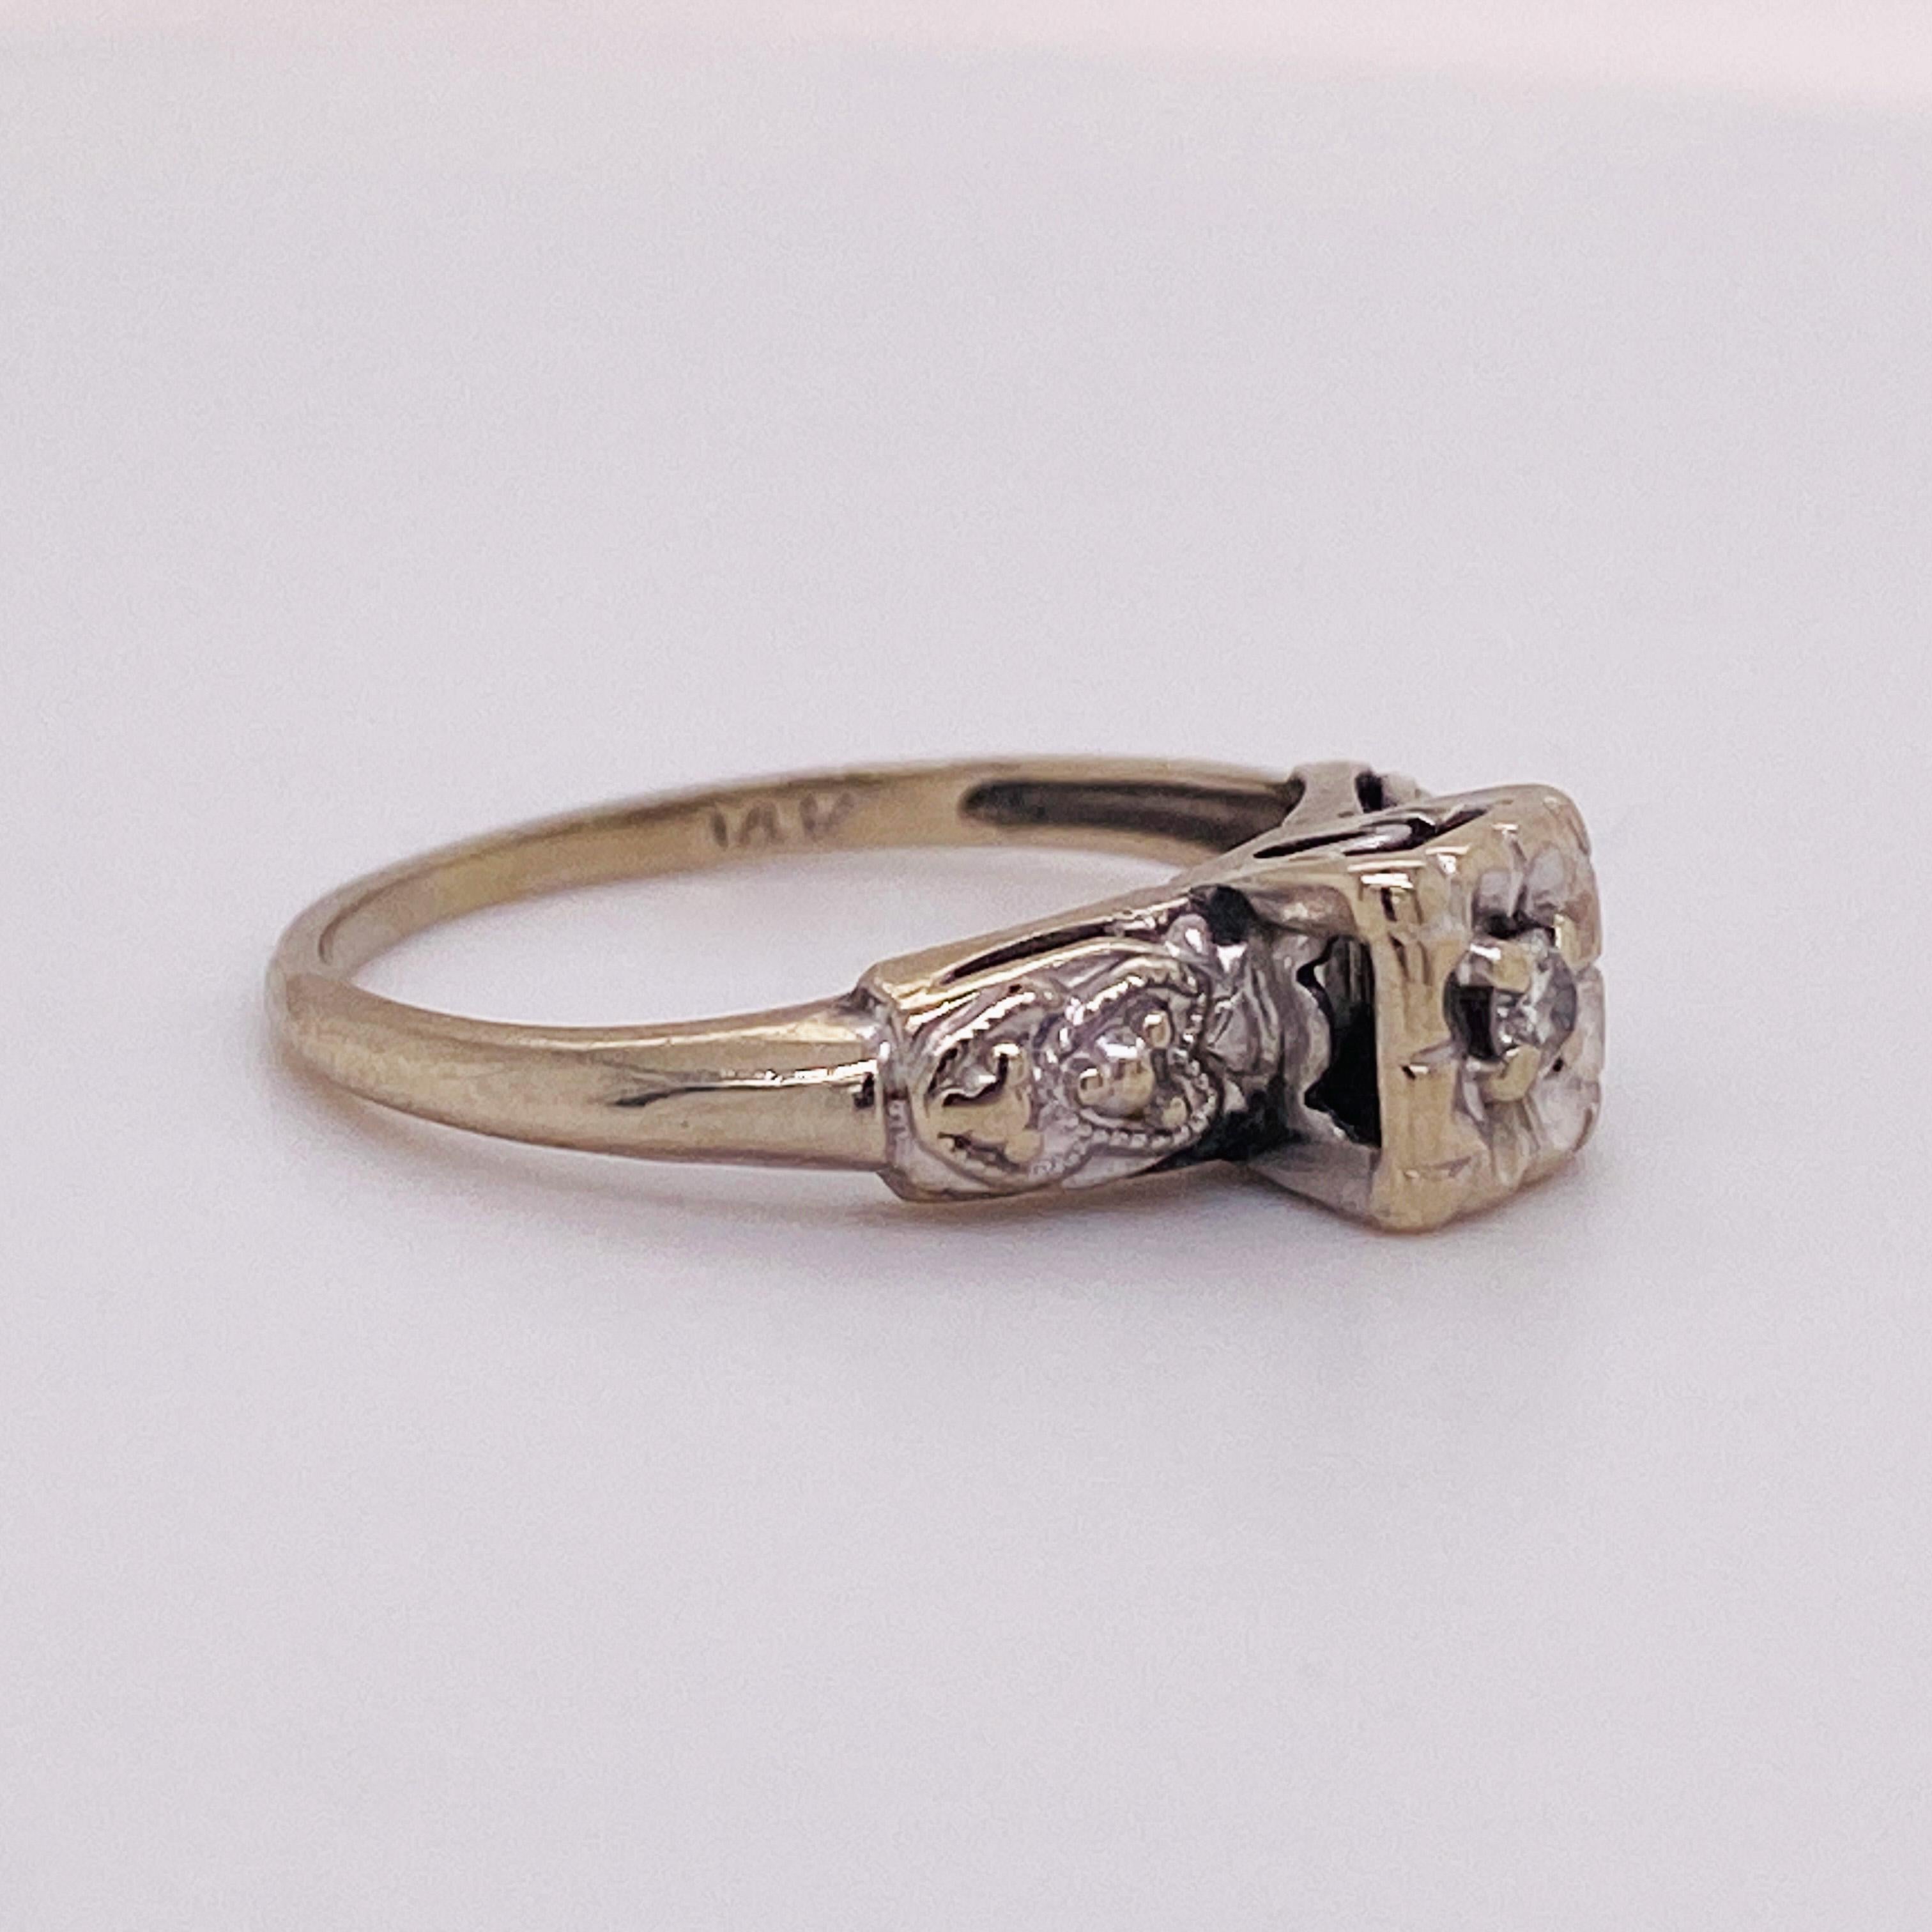 This is a diamond engagement ring that is Circa 1930. This estate ring has a wonderful history and was worn by a petite woman wearing a size 4.75. This engagement ring is solid 14 karat white gold with a .06 carat genuine, natural diamond. This ring